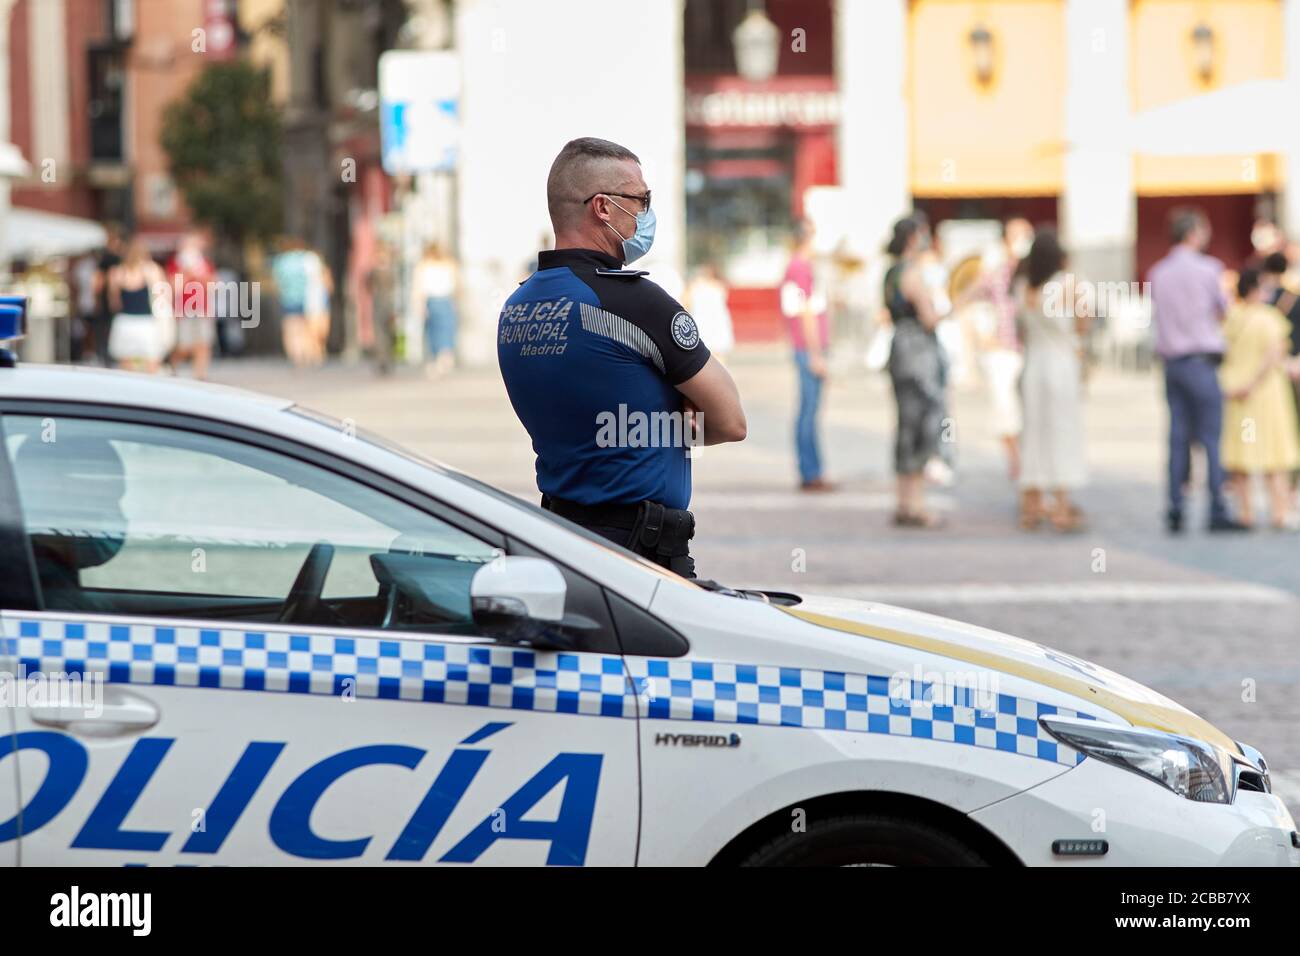 Madrid, Spain - August 8, 2020: Municipal police patrols during the Covid-19 pandemic Stock Photo